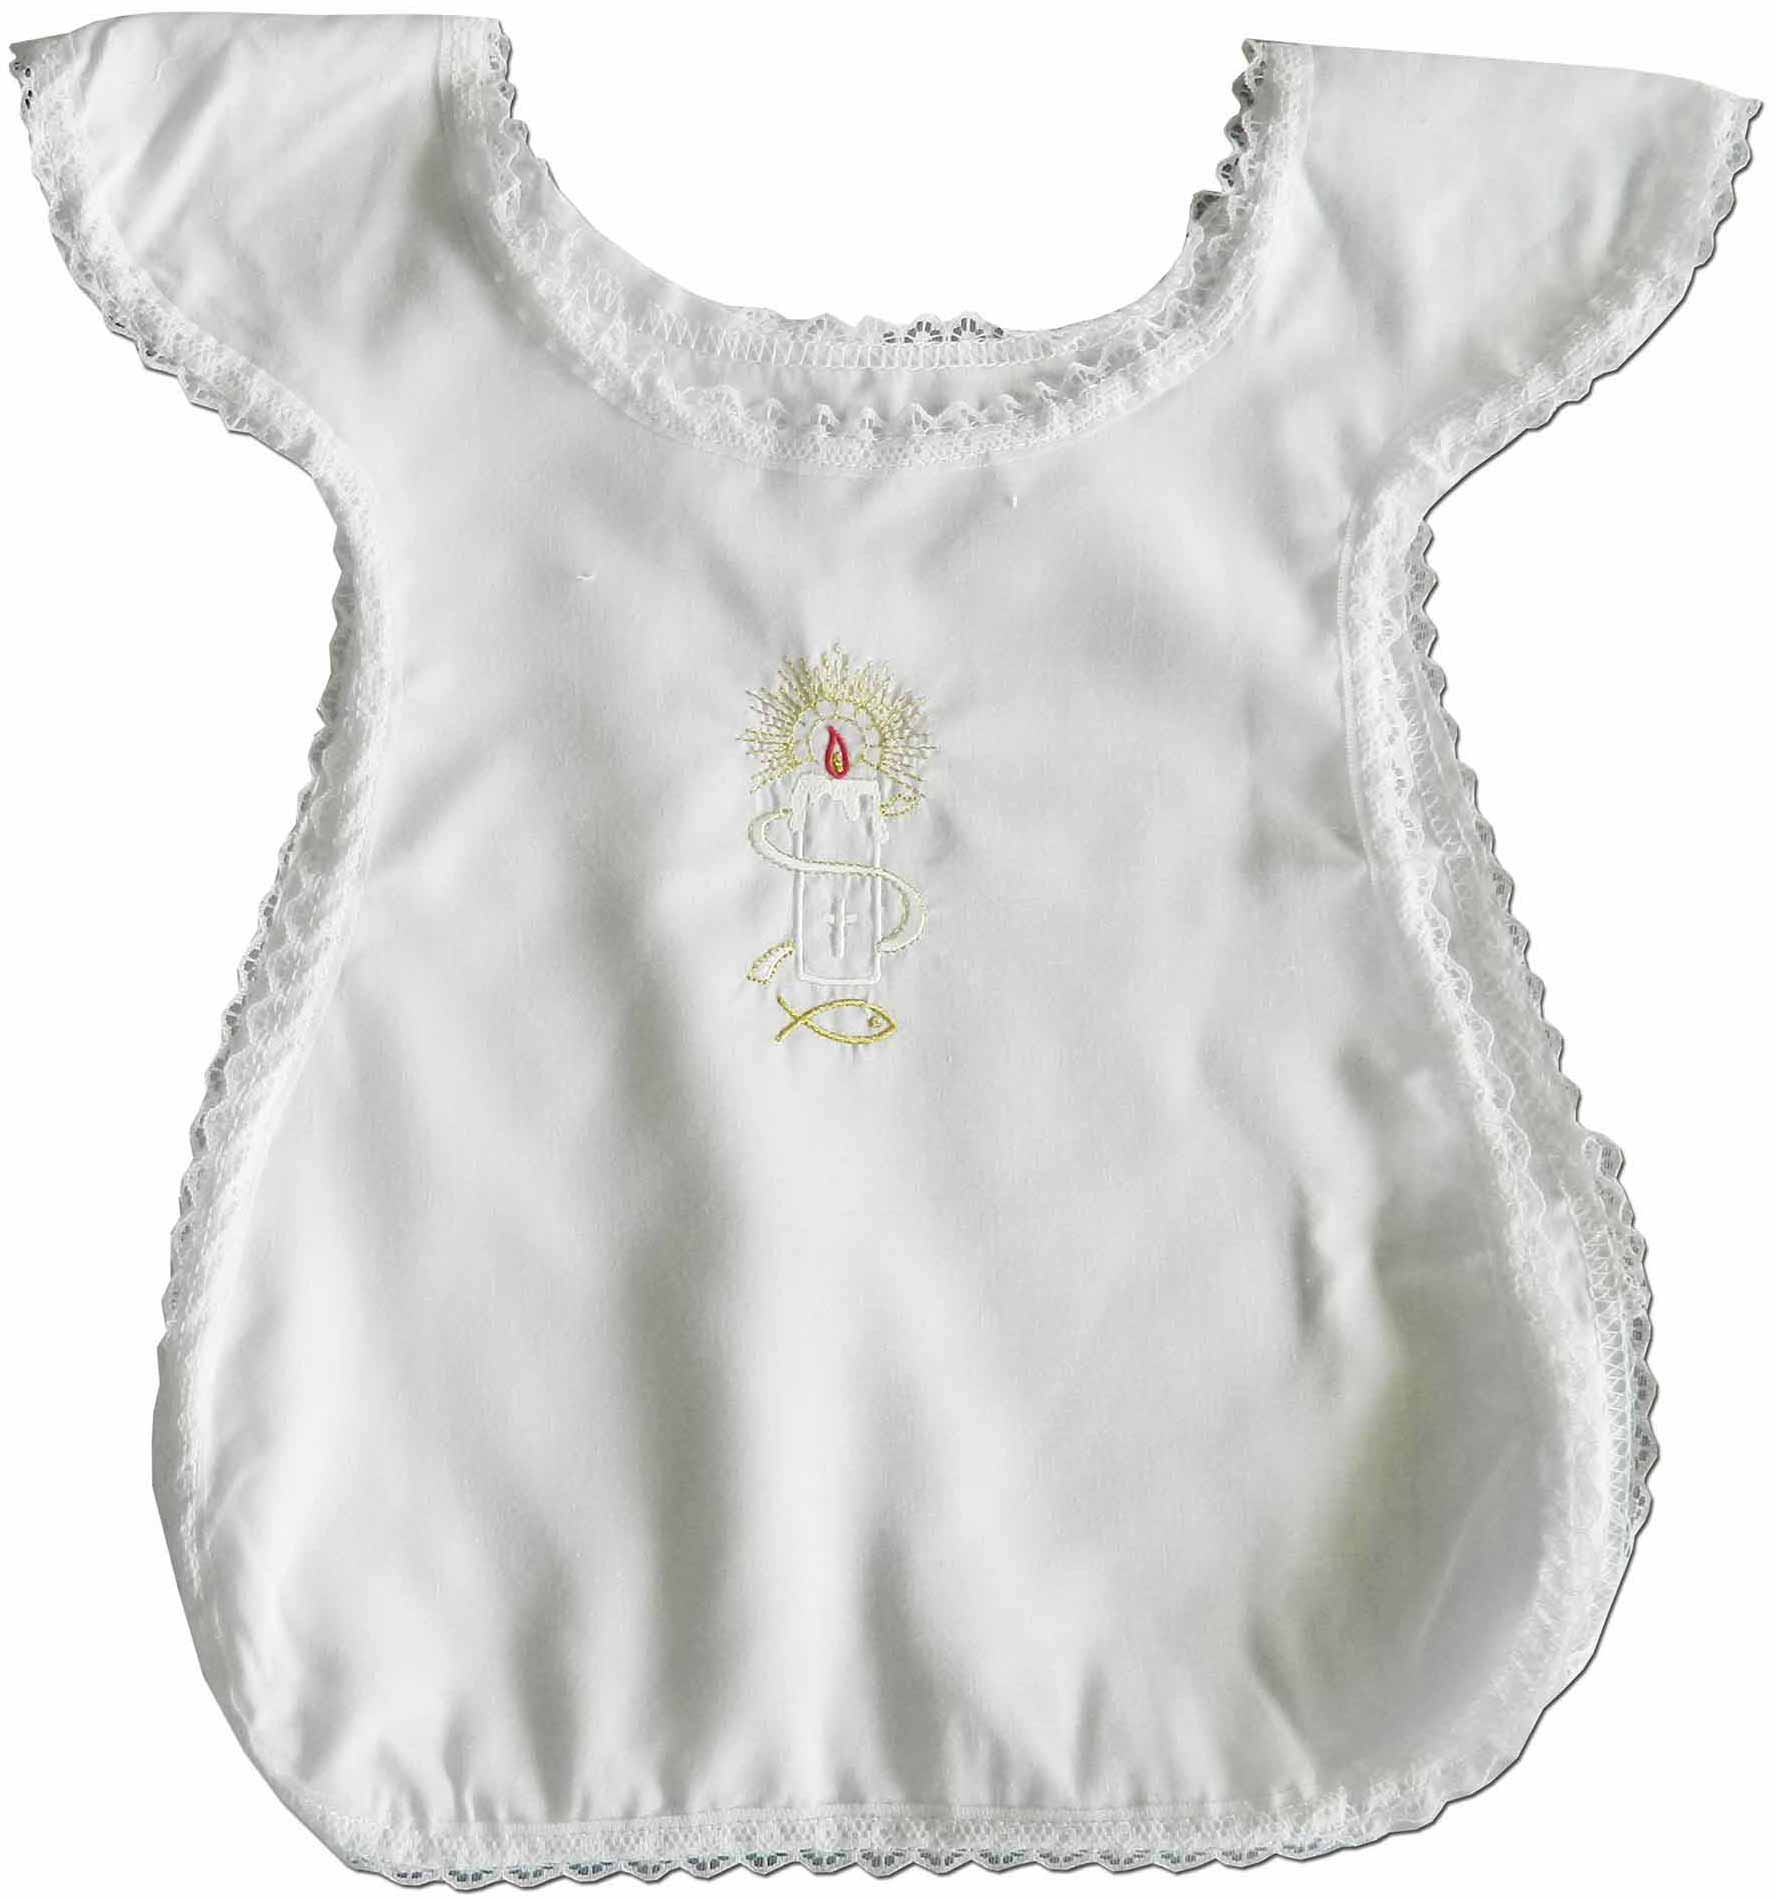 Baptism gown with cross 65% polyester 35% cotton